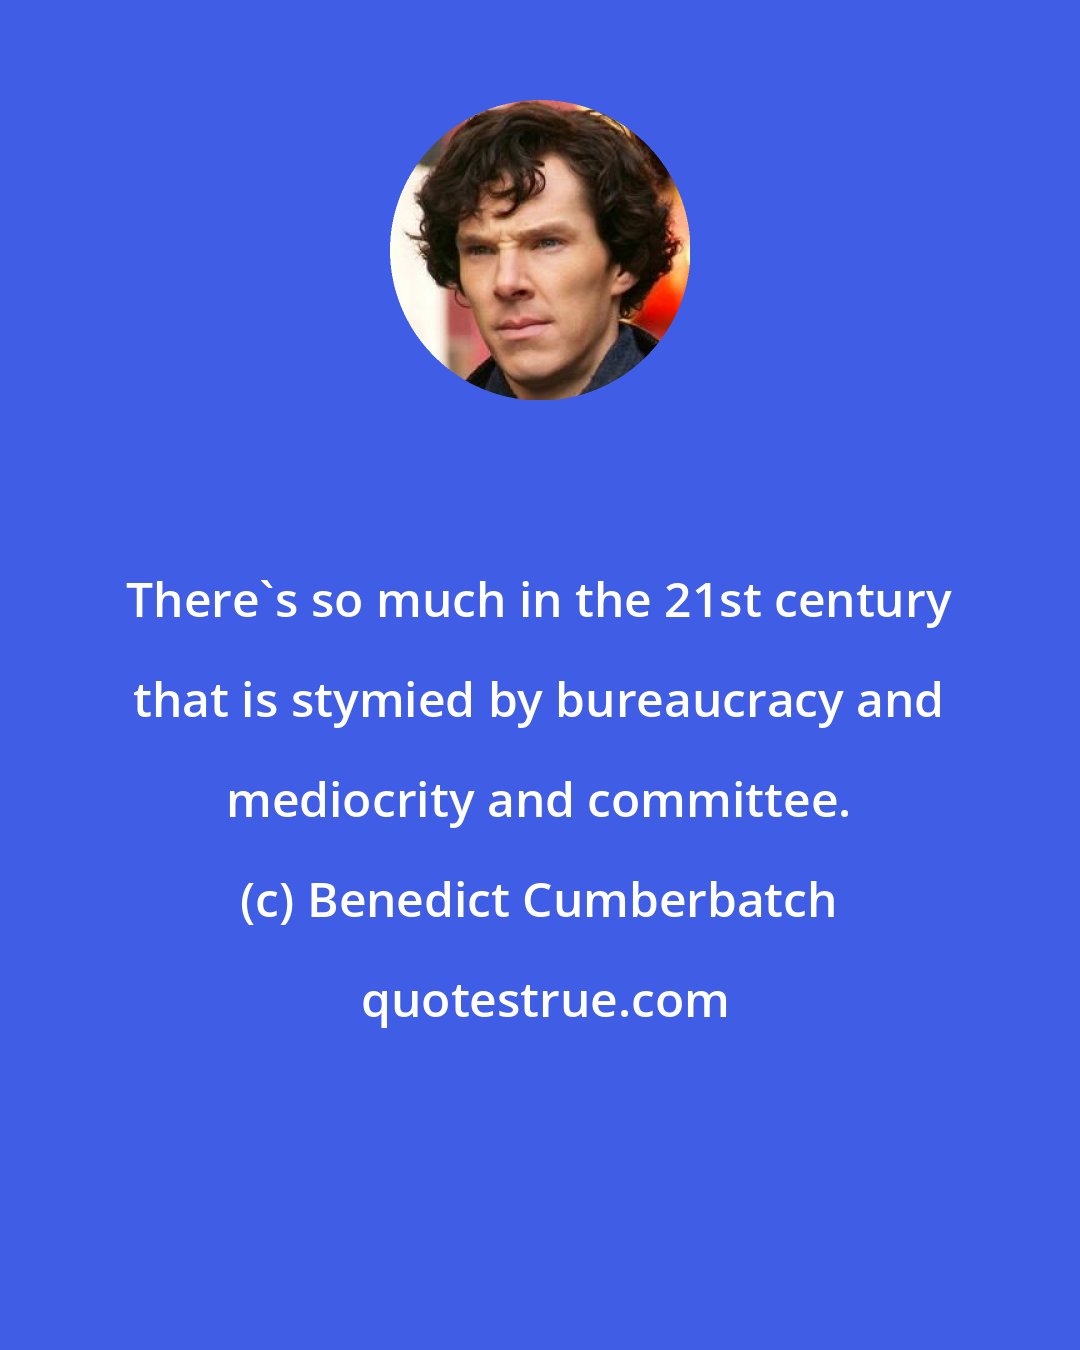 Benedict Cumberbatch: There's so much in the 21st century that is stymied by bureaucracy and mediocrity and committee.